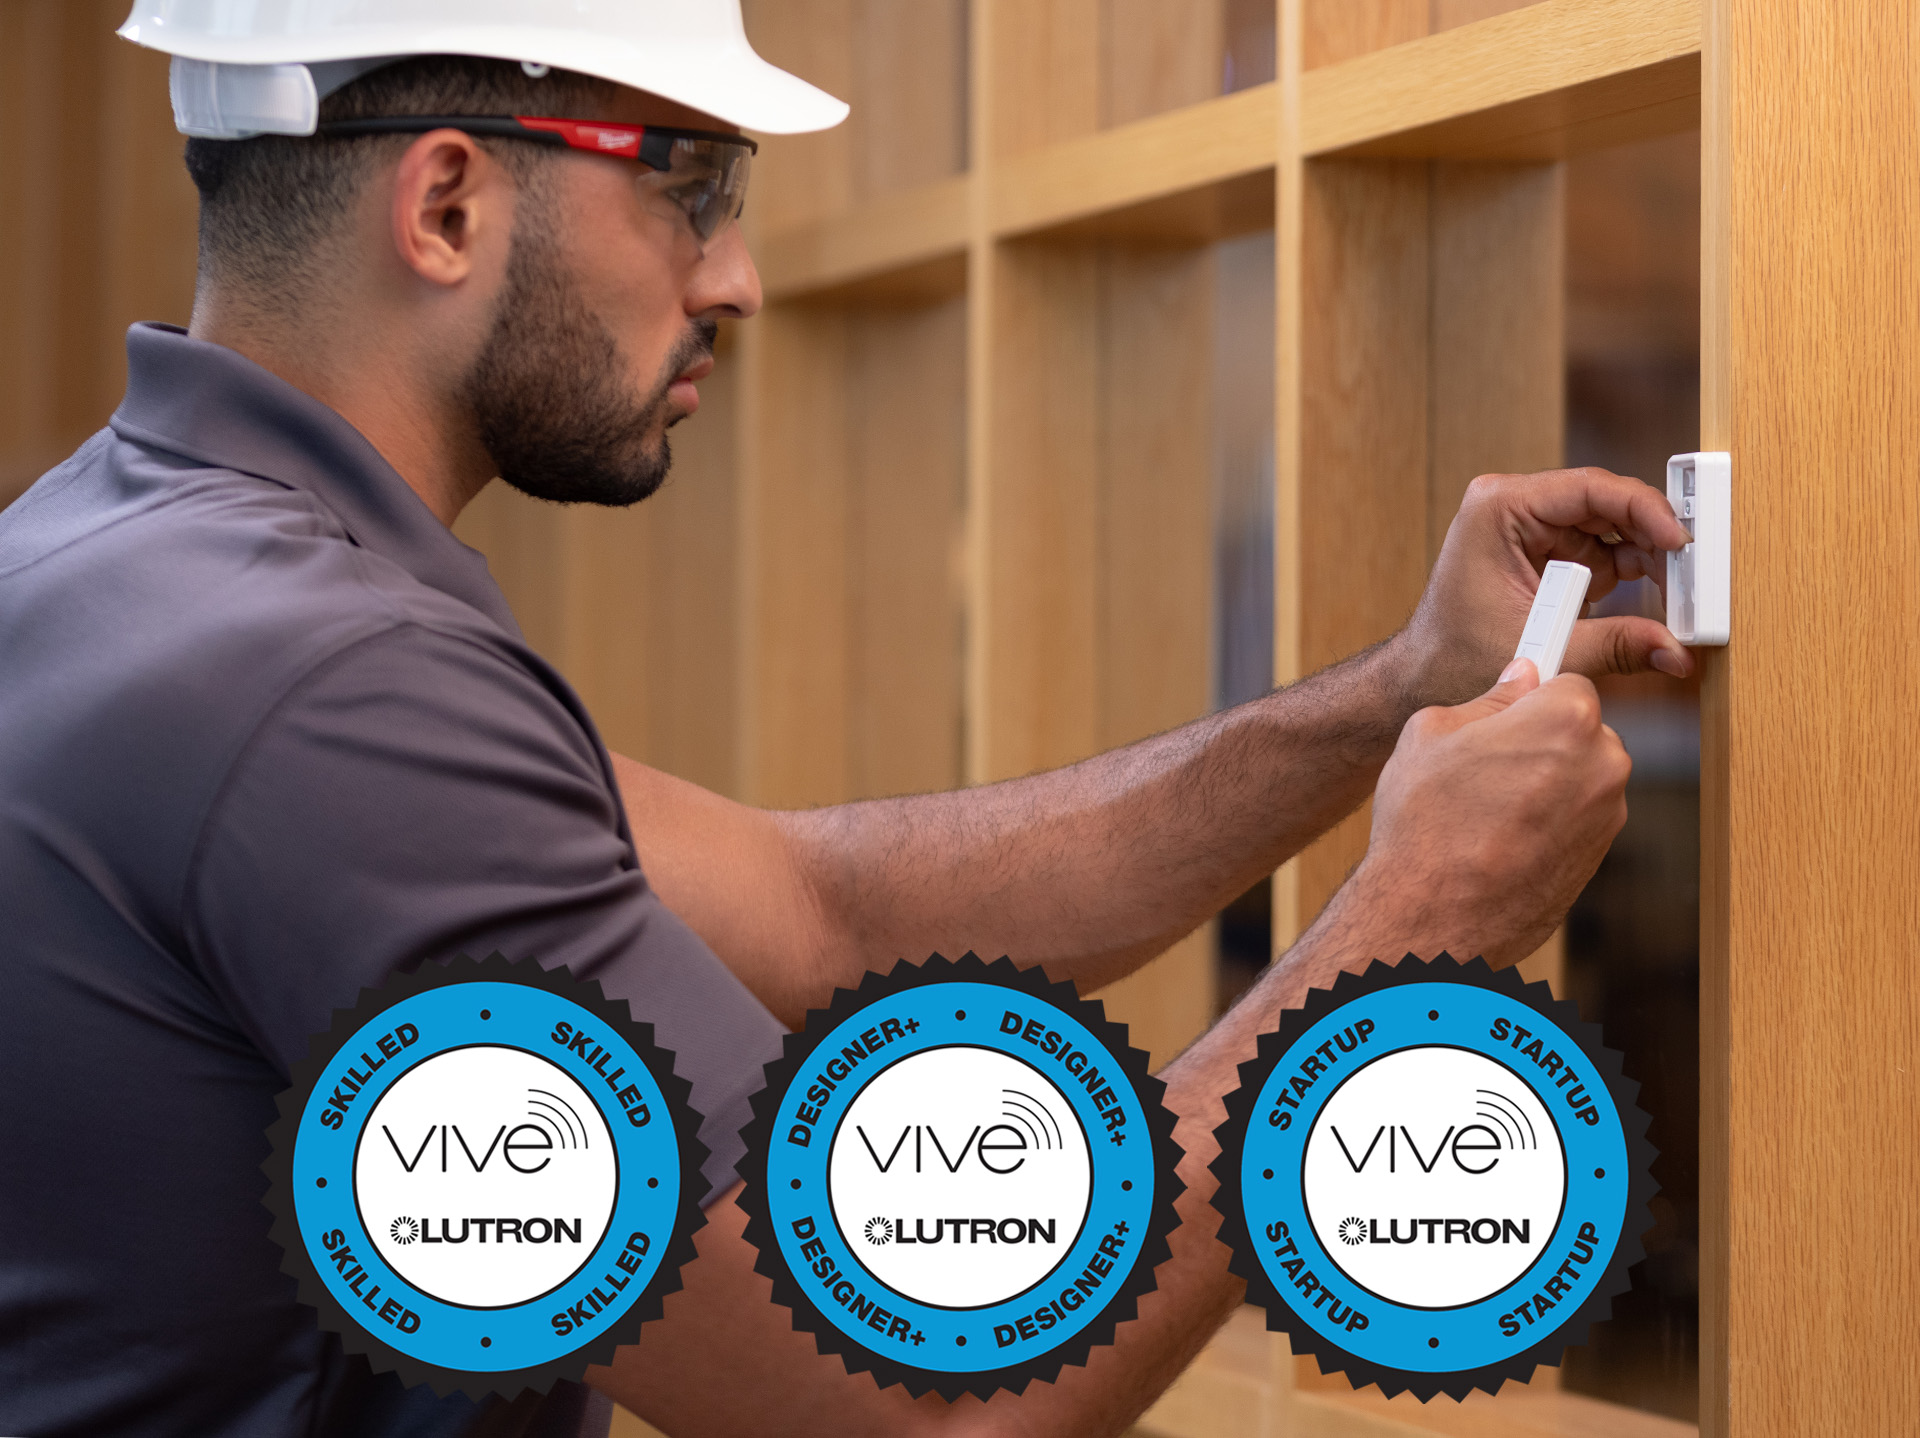 Contractor install Lutron product and displaying Vive Training Badges